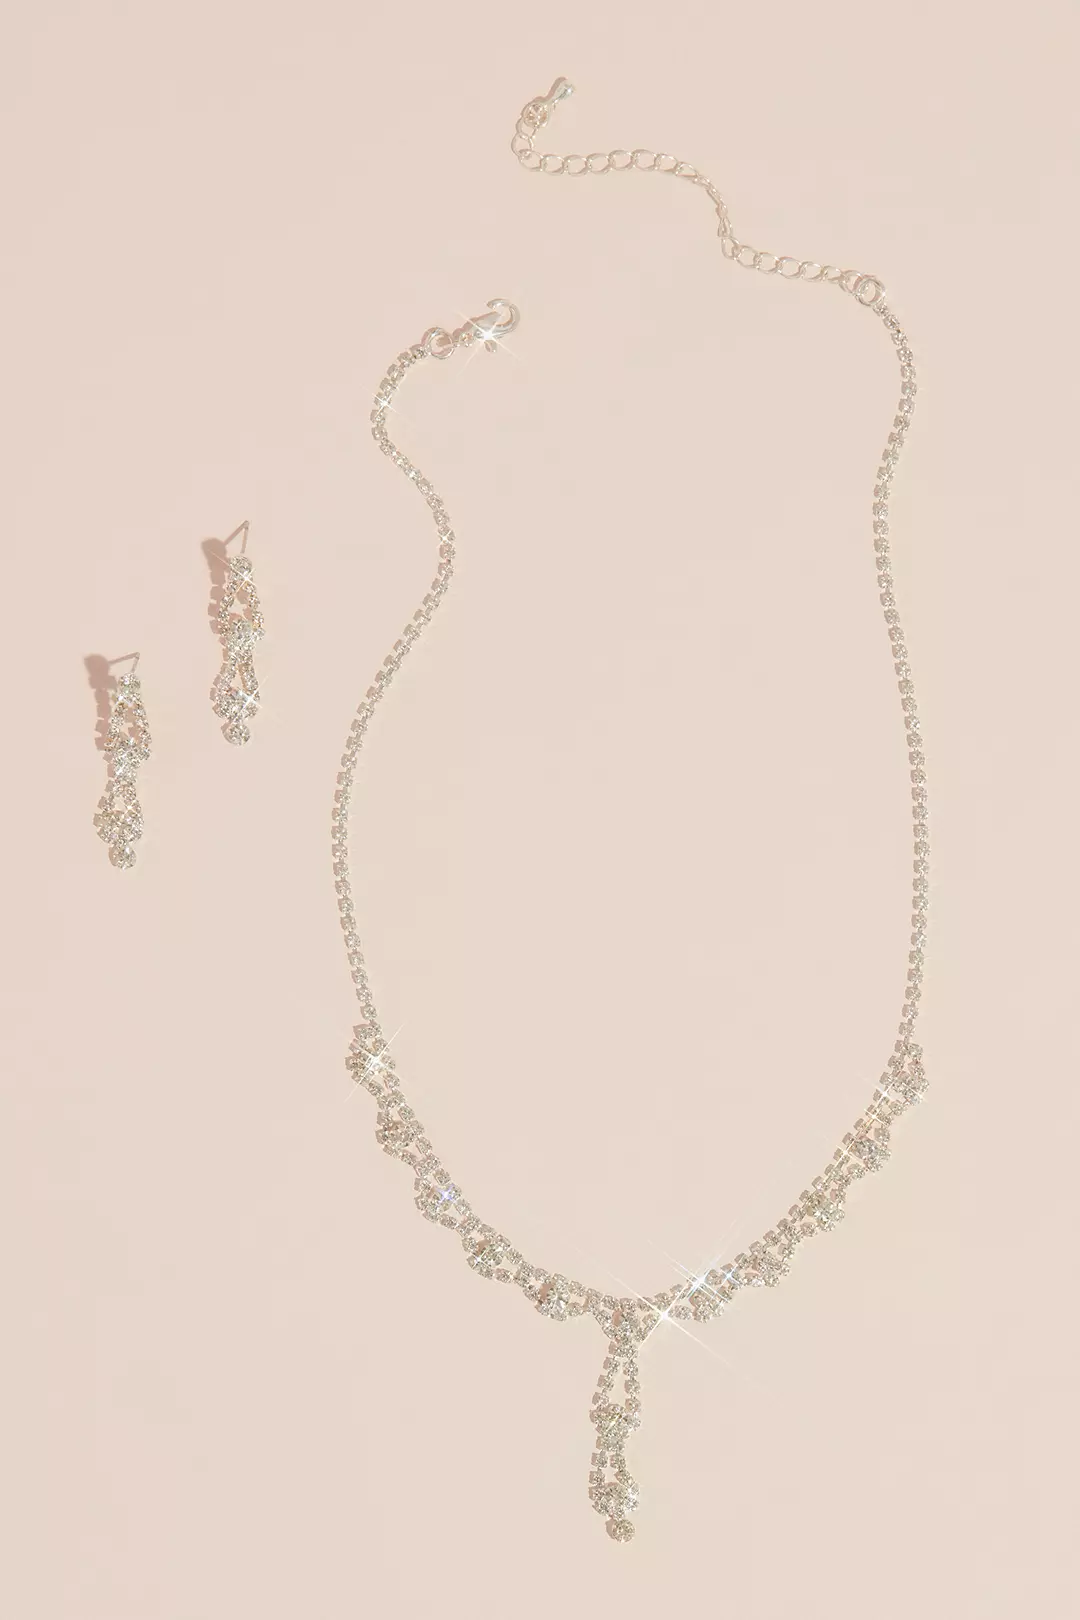 Double Drop Crystal Earring and Necklace Set Image